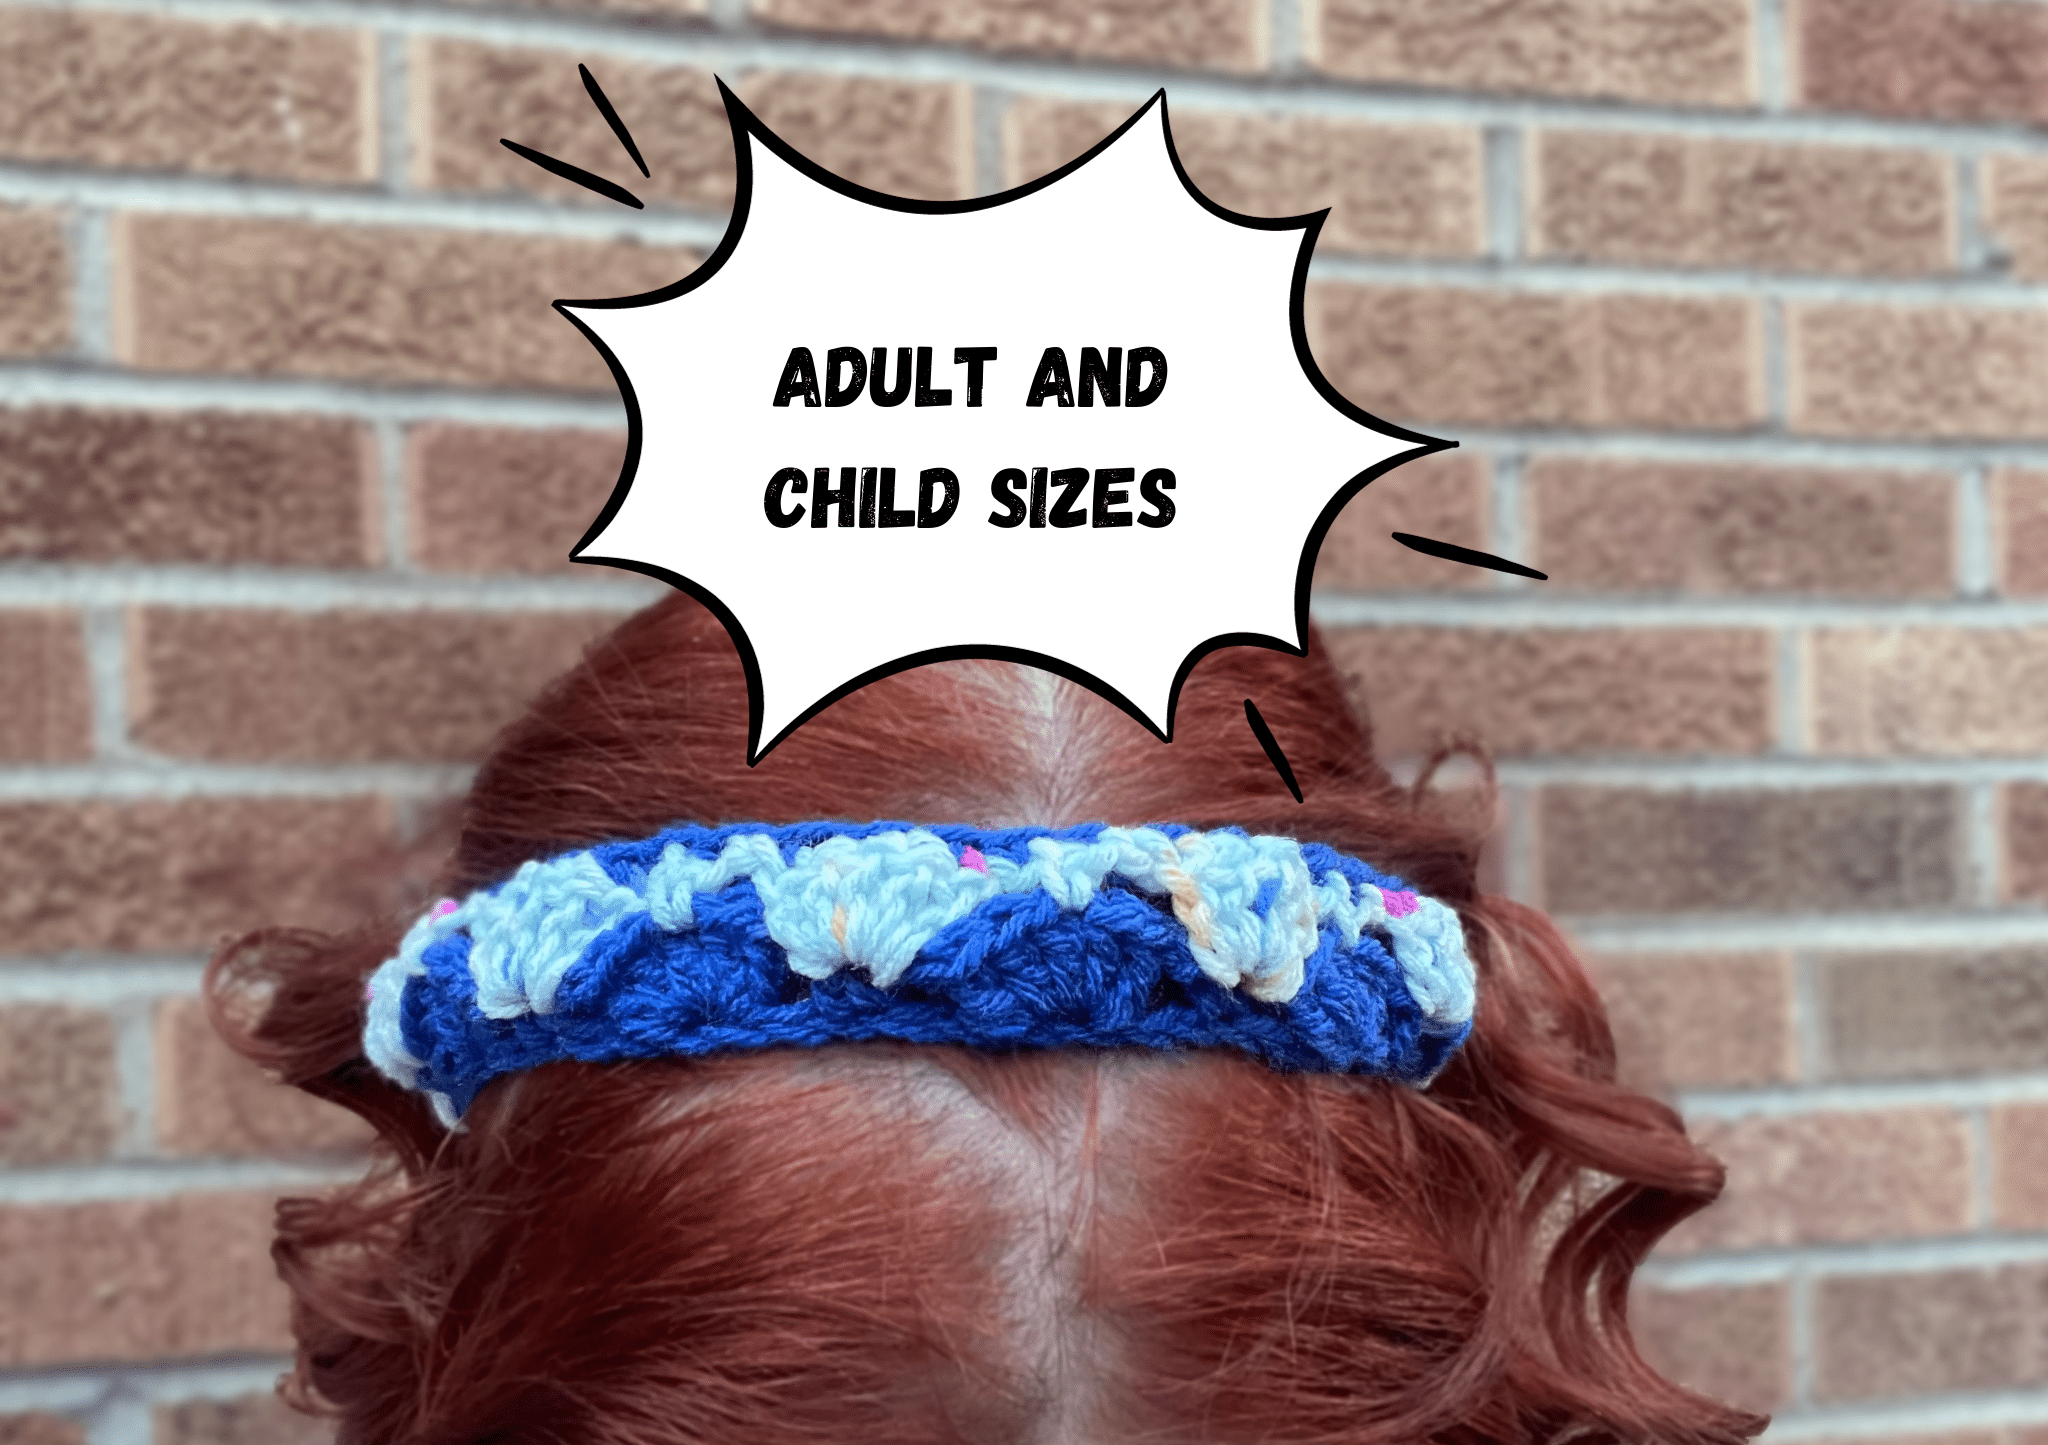 Inner Triangle Headband with Adult and Child Sizes text